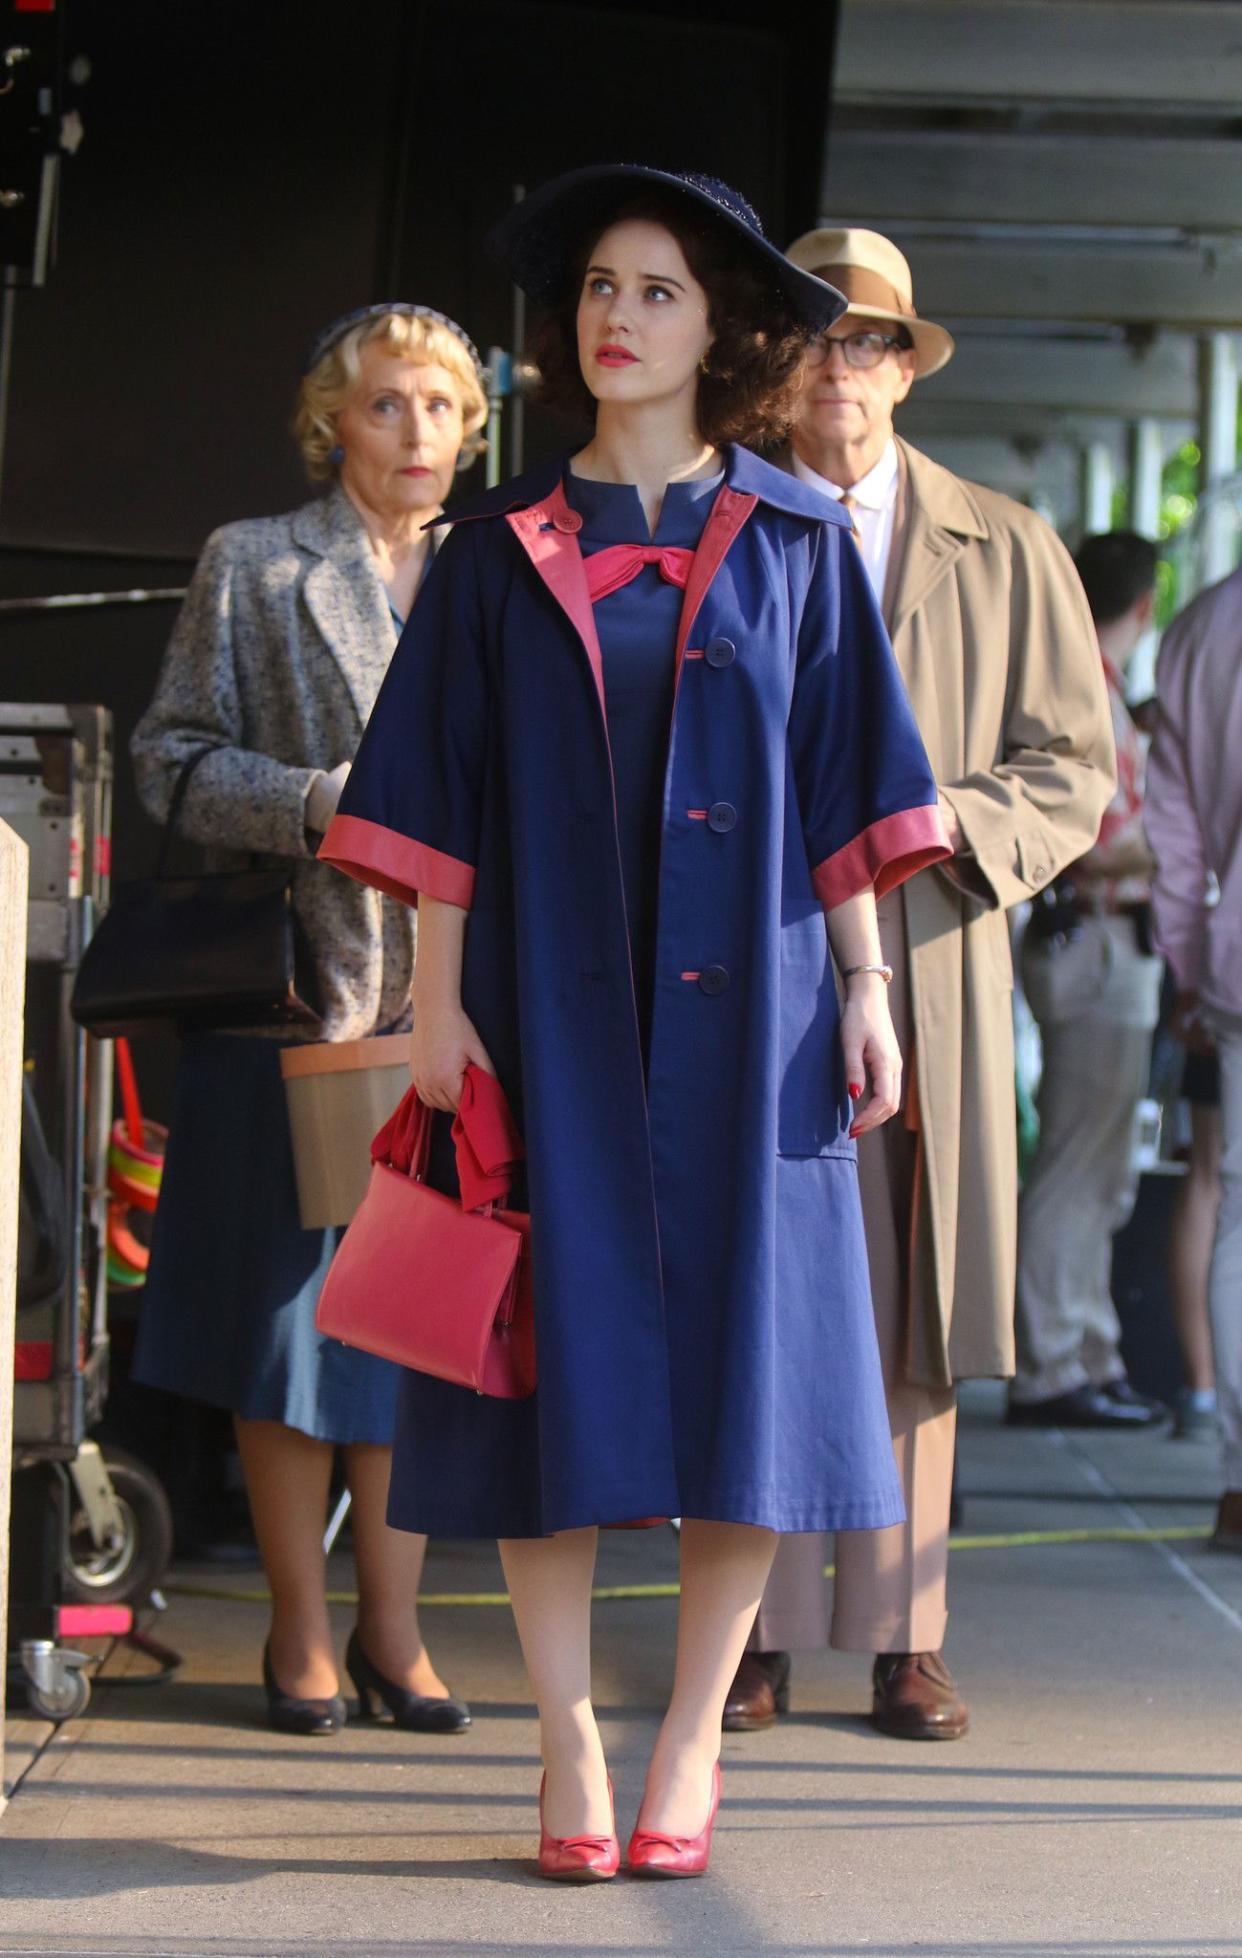 Rachel Brosnahan looks radiant in a navy blue and pink coat and dress, with matching accessories, while filming a scene for "The Marvelous Mrs. Maisel" in New York City on Aug. 15, 2019.